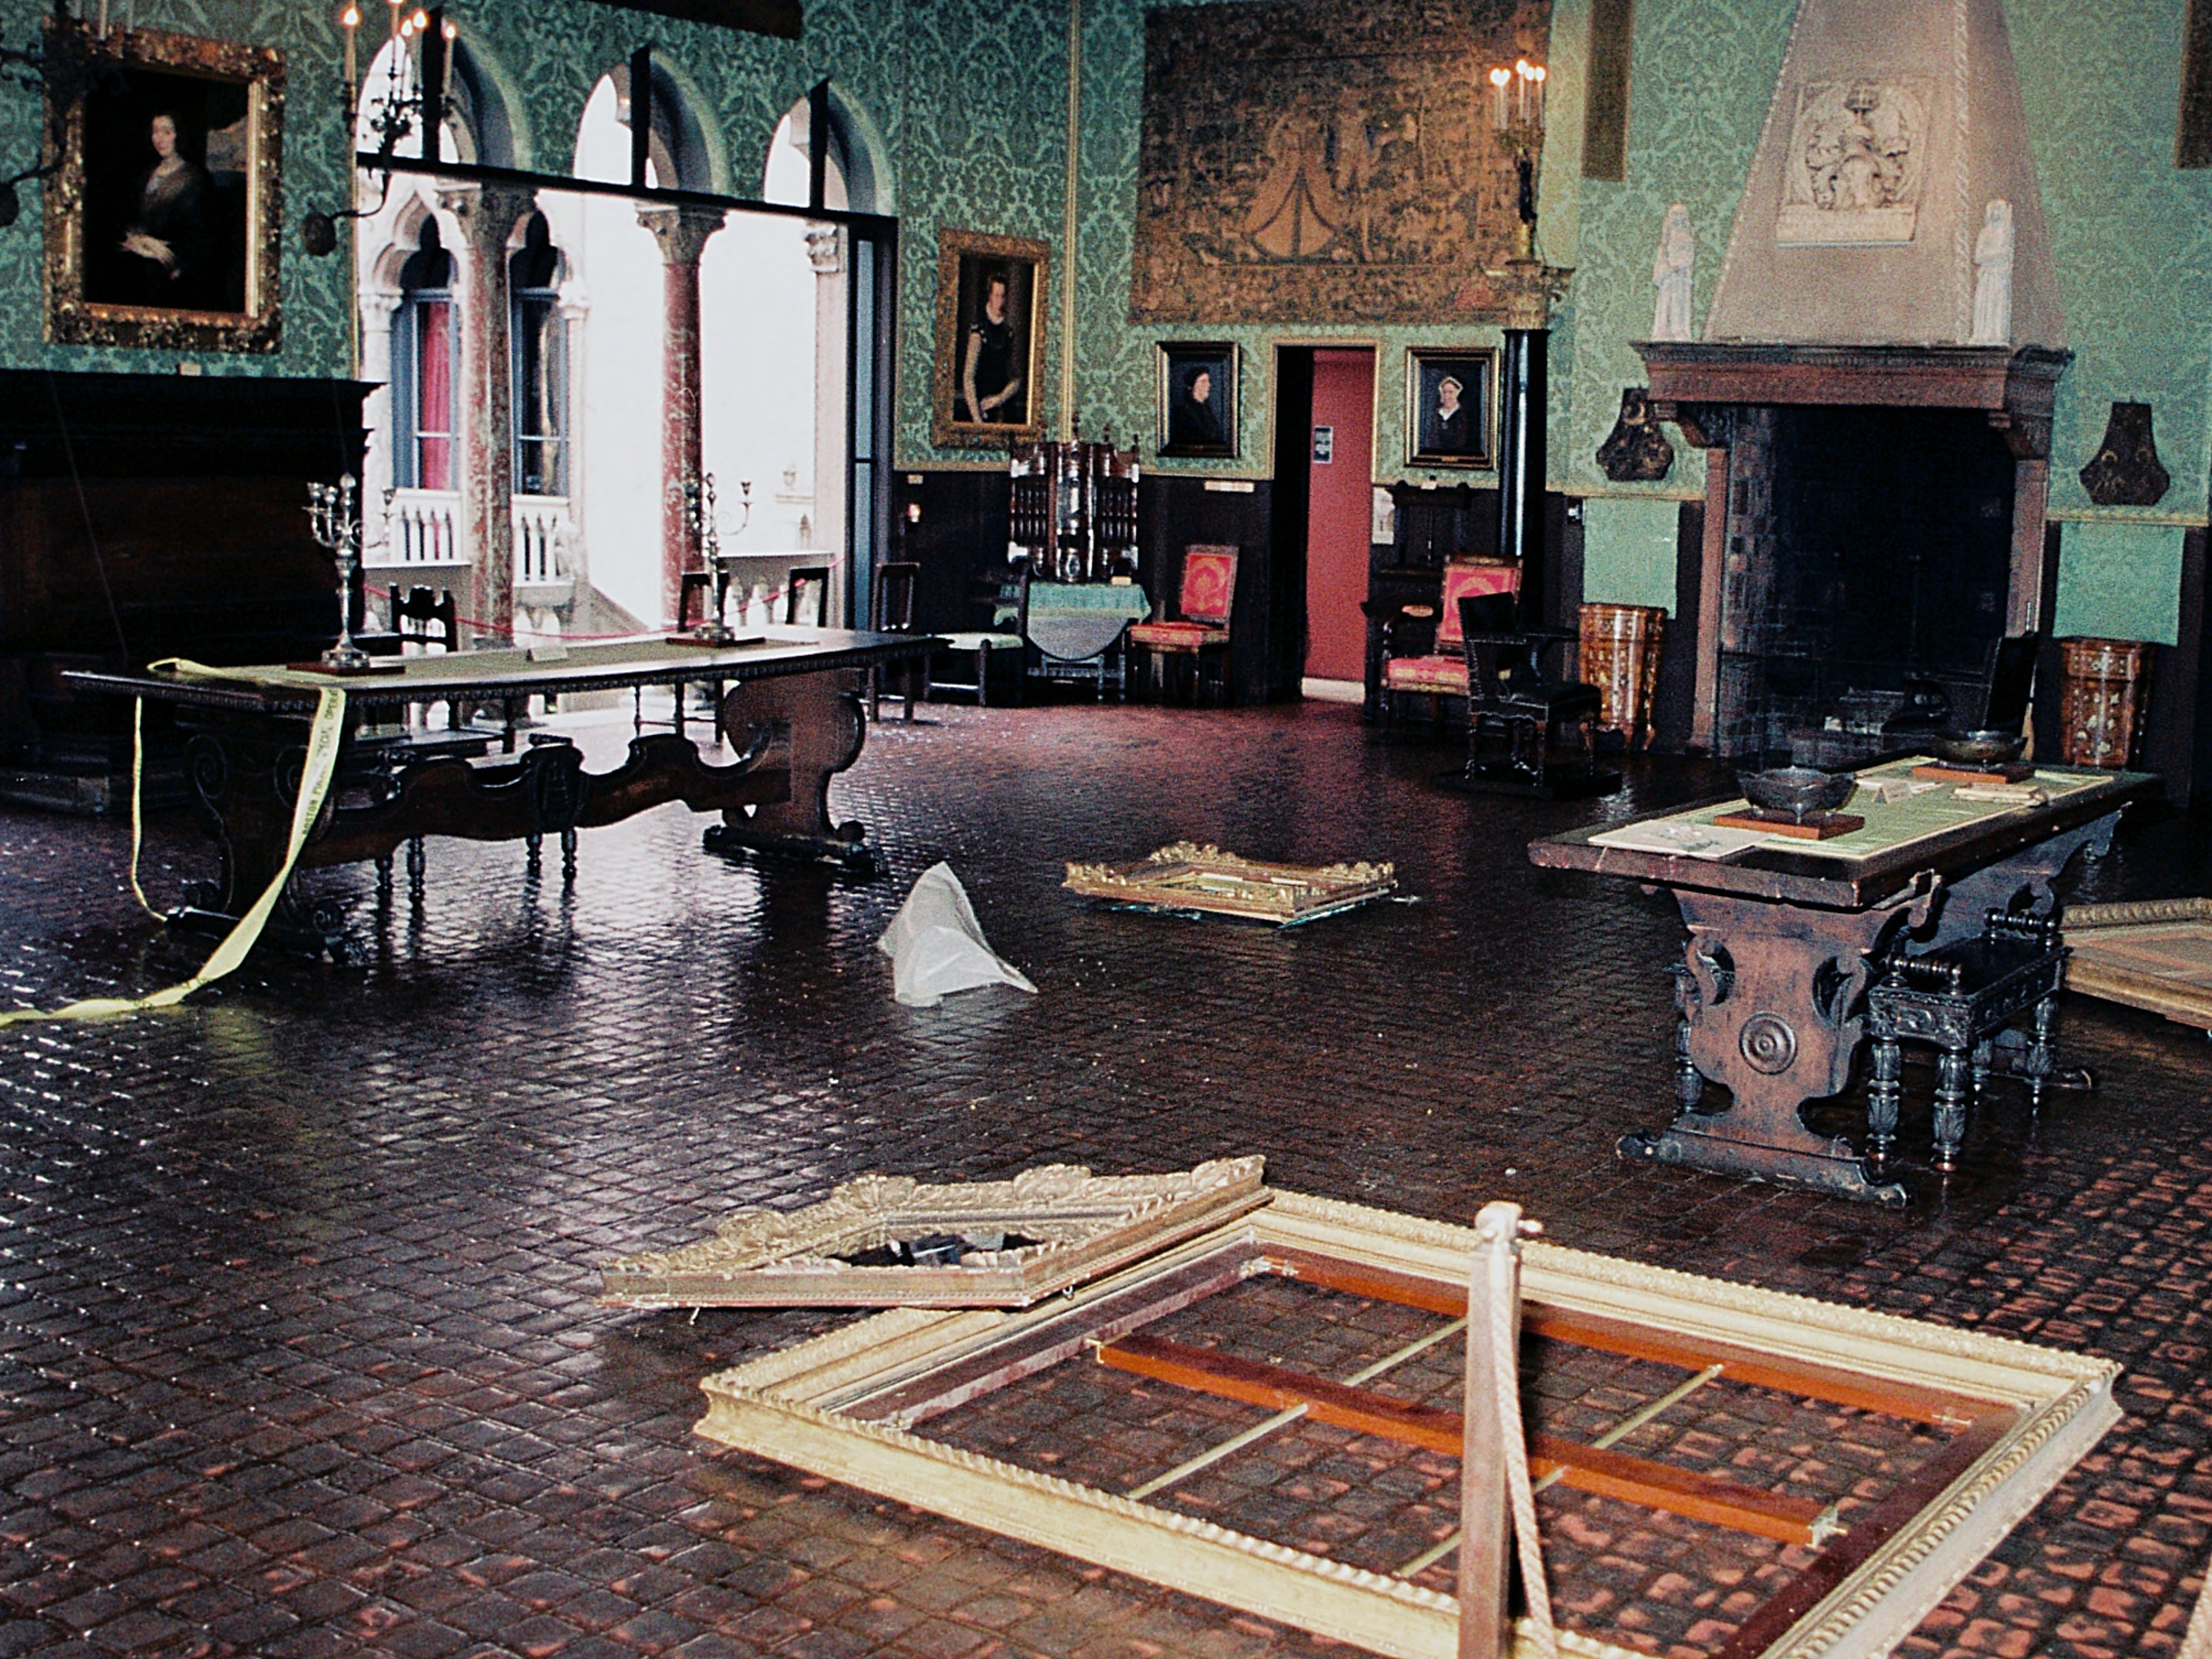 FBI photograph of the crime scene after the Isabella Stewart Gardner Museum robbery in Boston, Massachusetts, in 1990